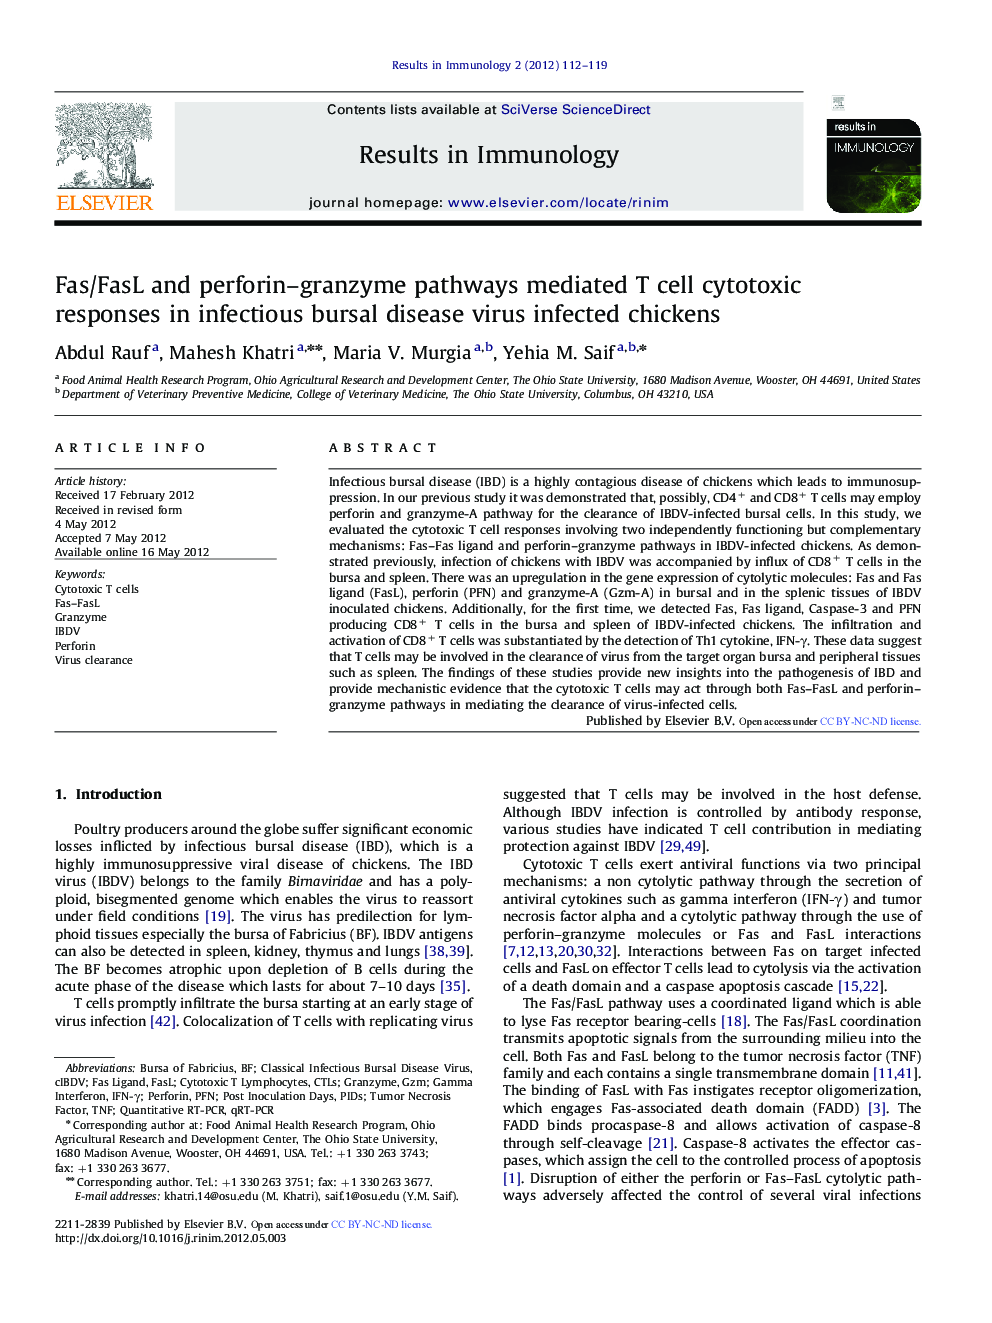 Fas/FasL and perforin–granzyme pathways mediated T cell cytotoxic responses in infectious bursal disease virus infected chickens